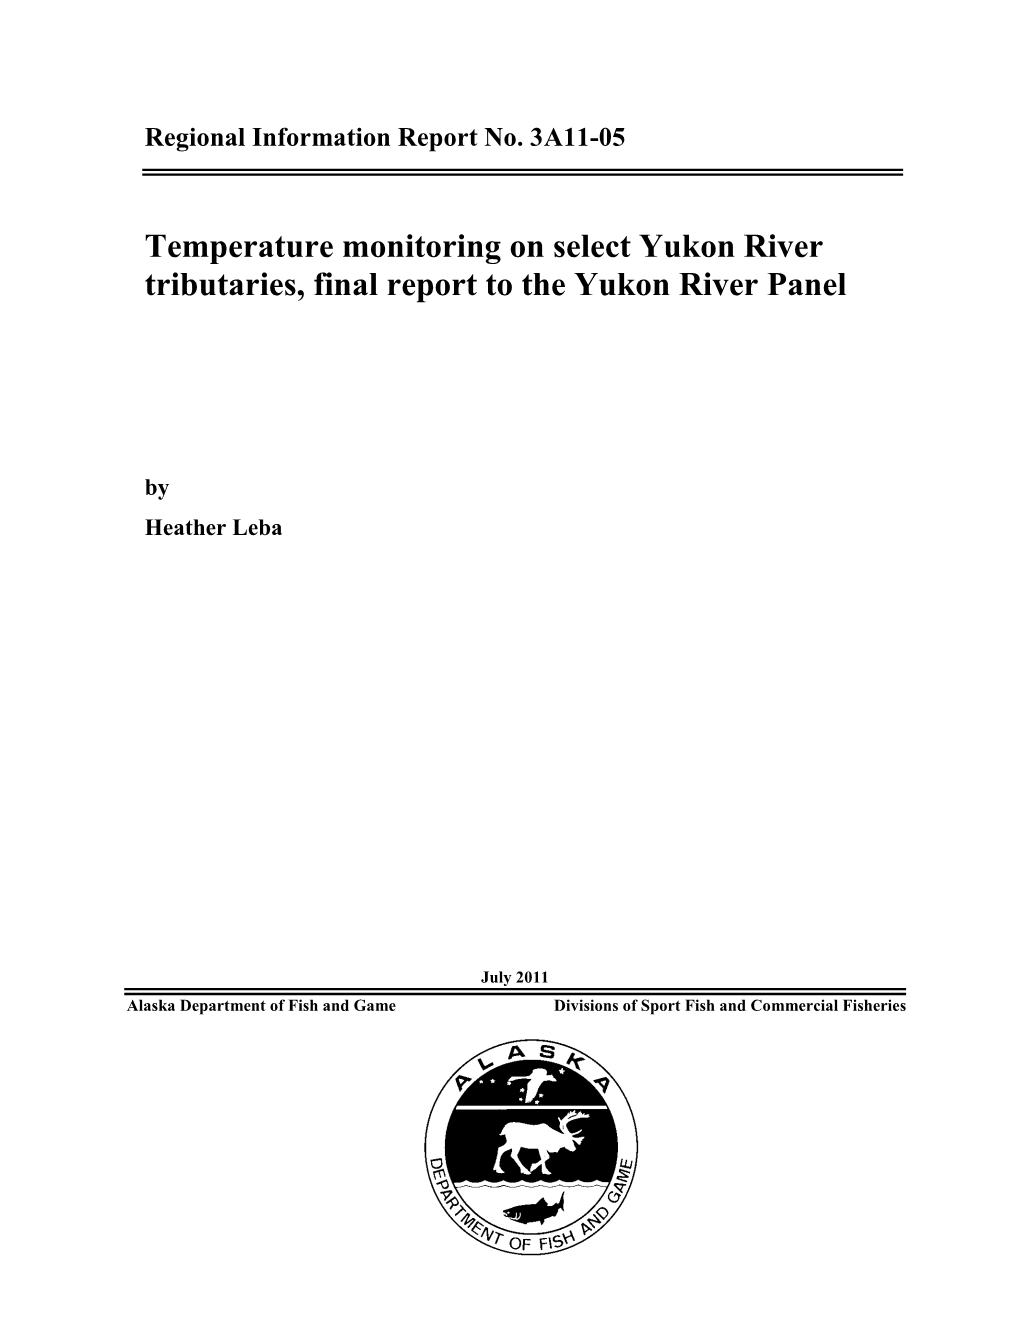 Temperature Monitoring on Select Yukon River Tributaries. Alaska Department of Fish and Game, Regional Information Report 3A 11-05, Anchorage